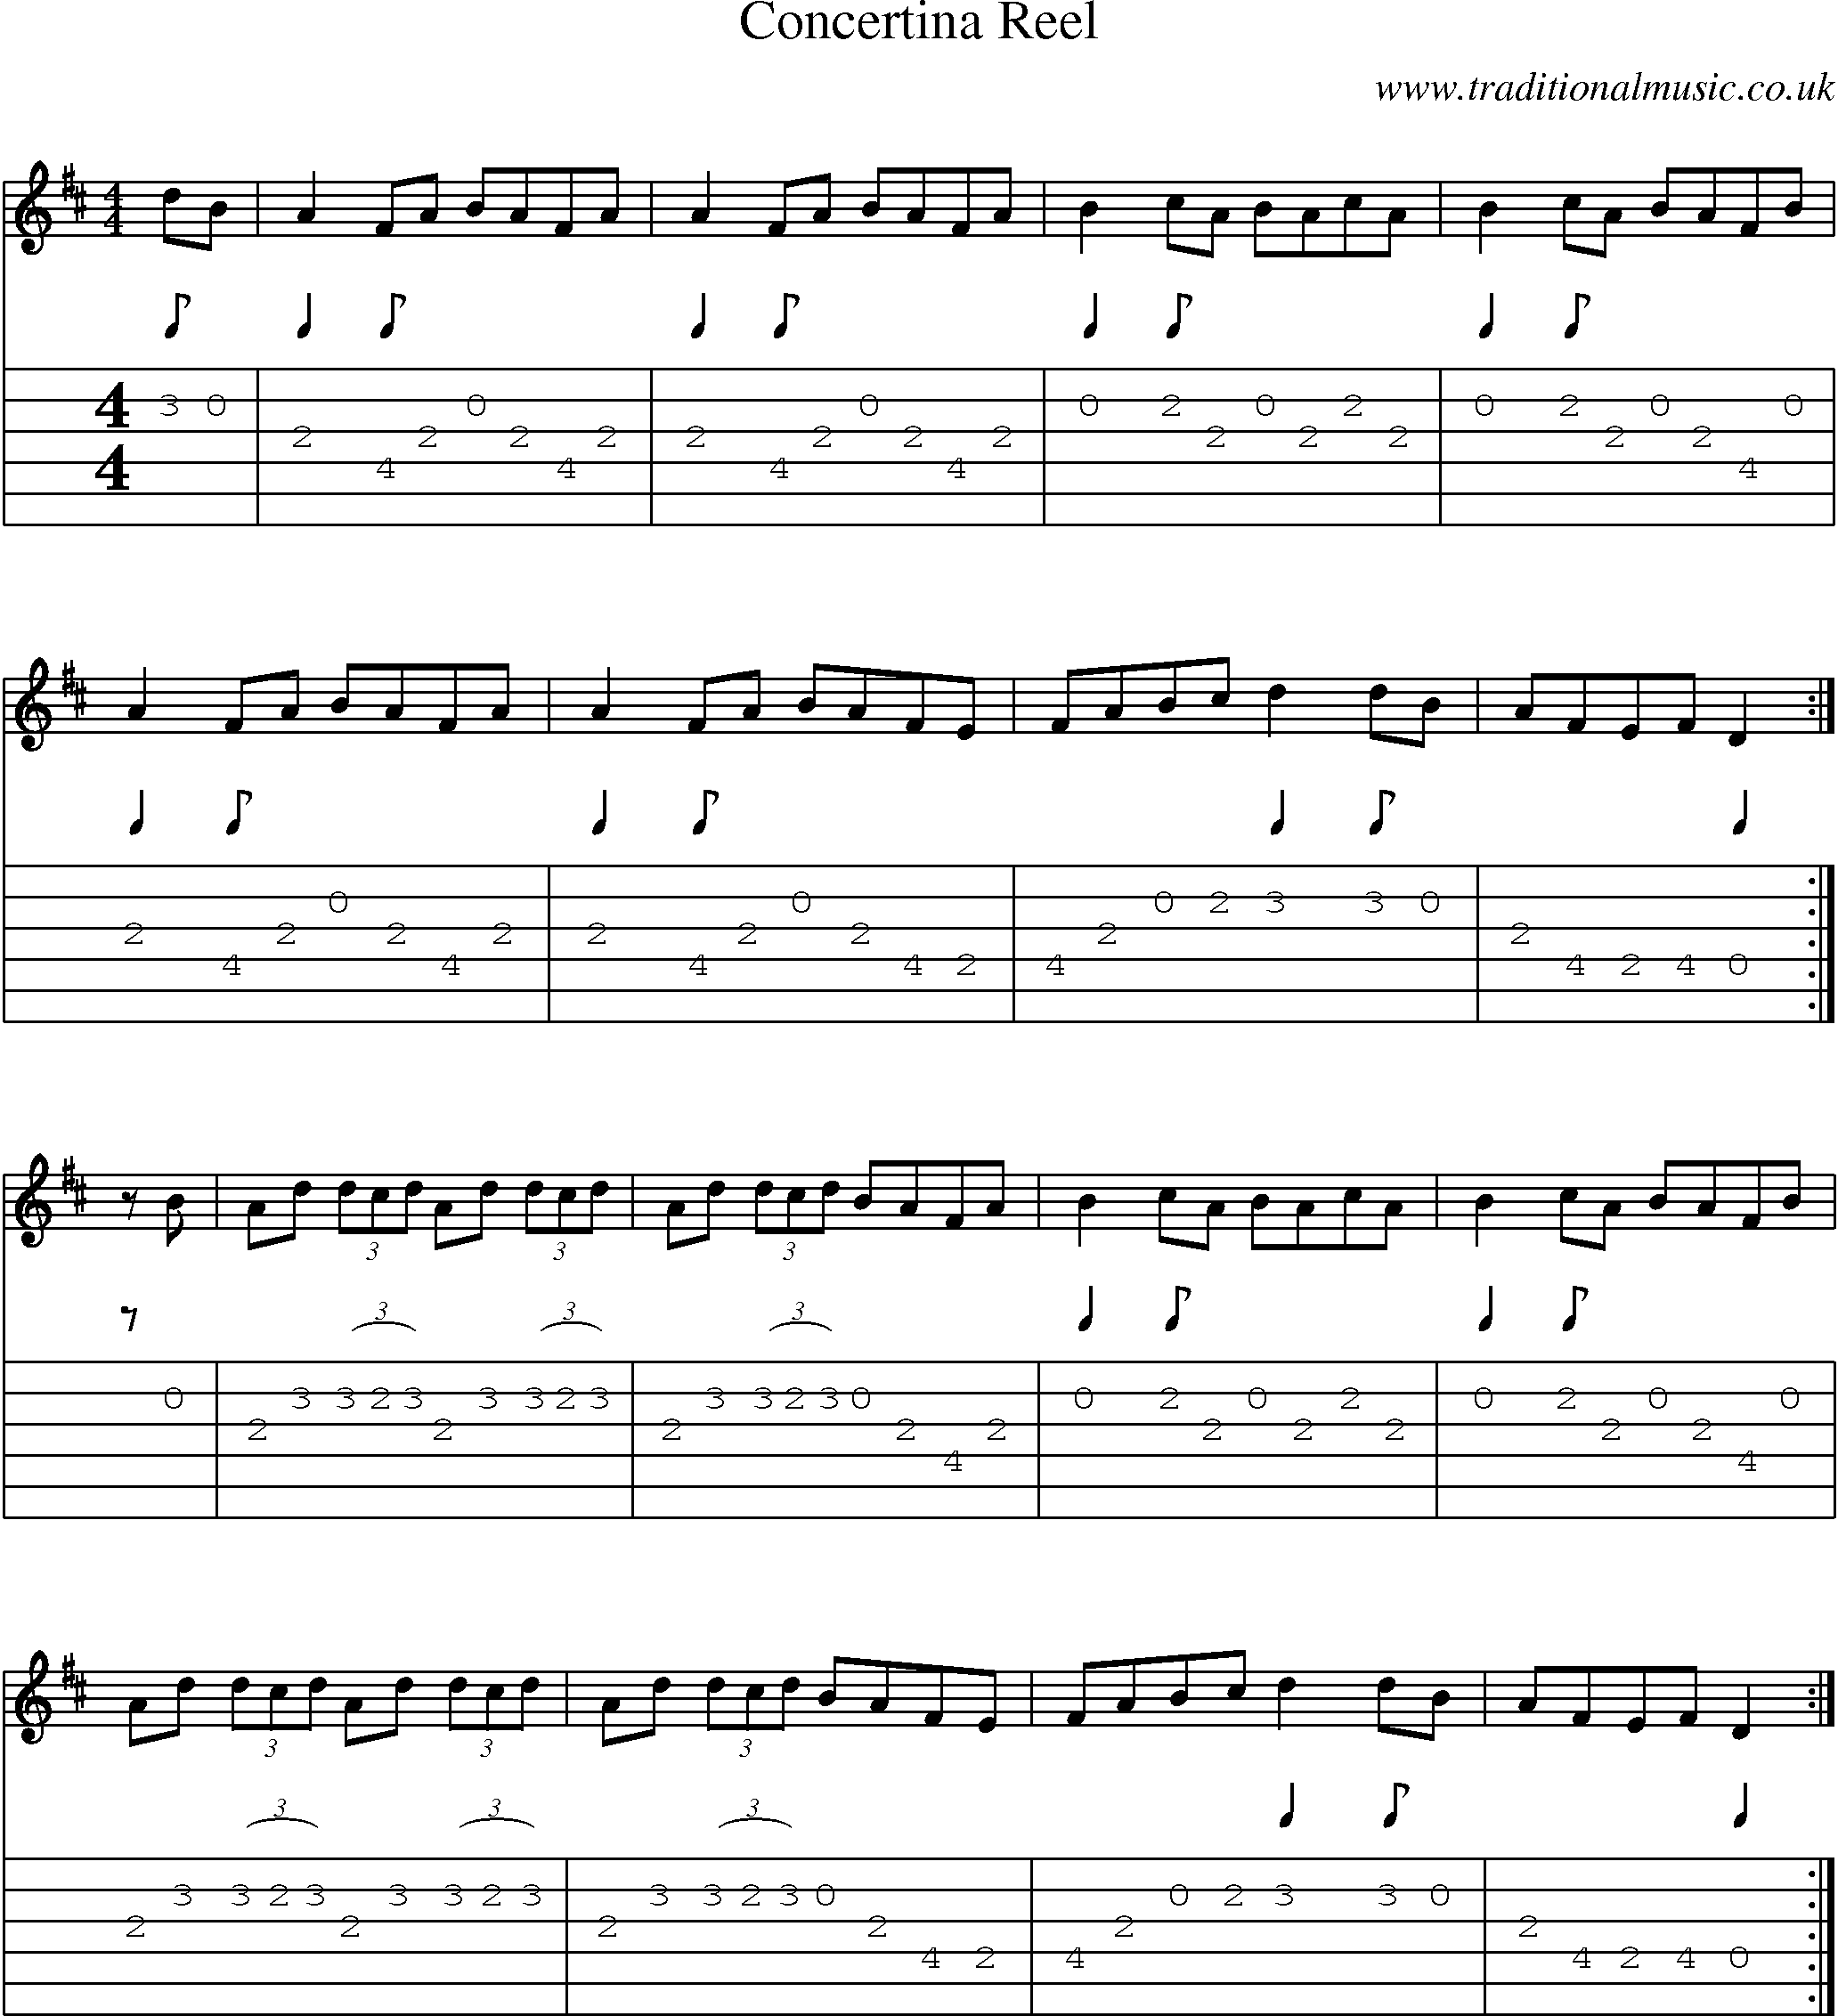 Music Score and Guitar Tabs for Concertina Reel